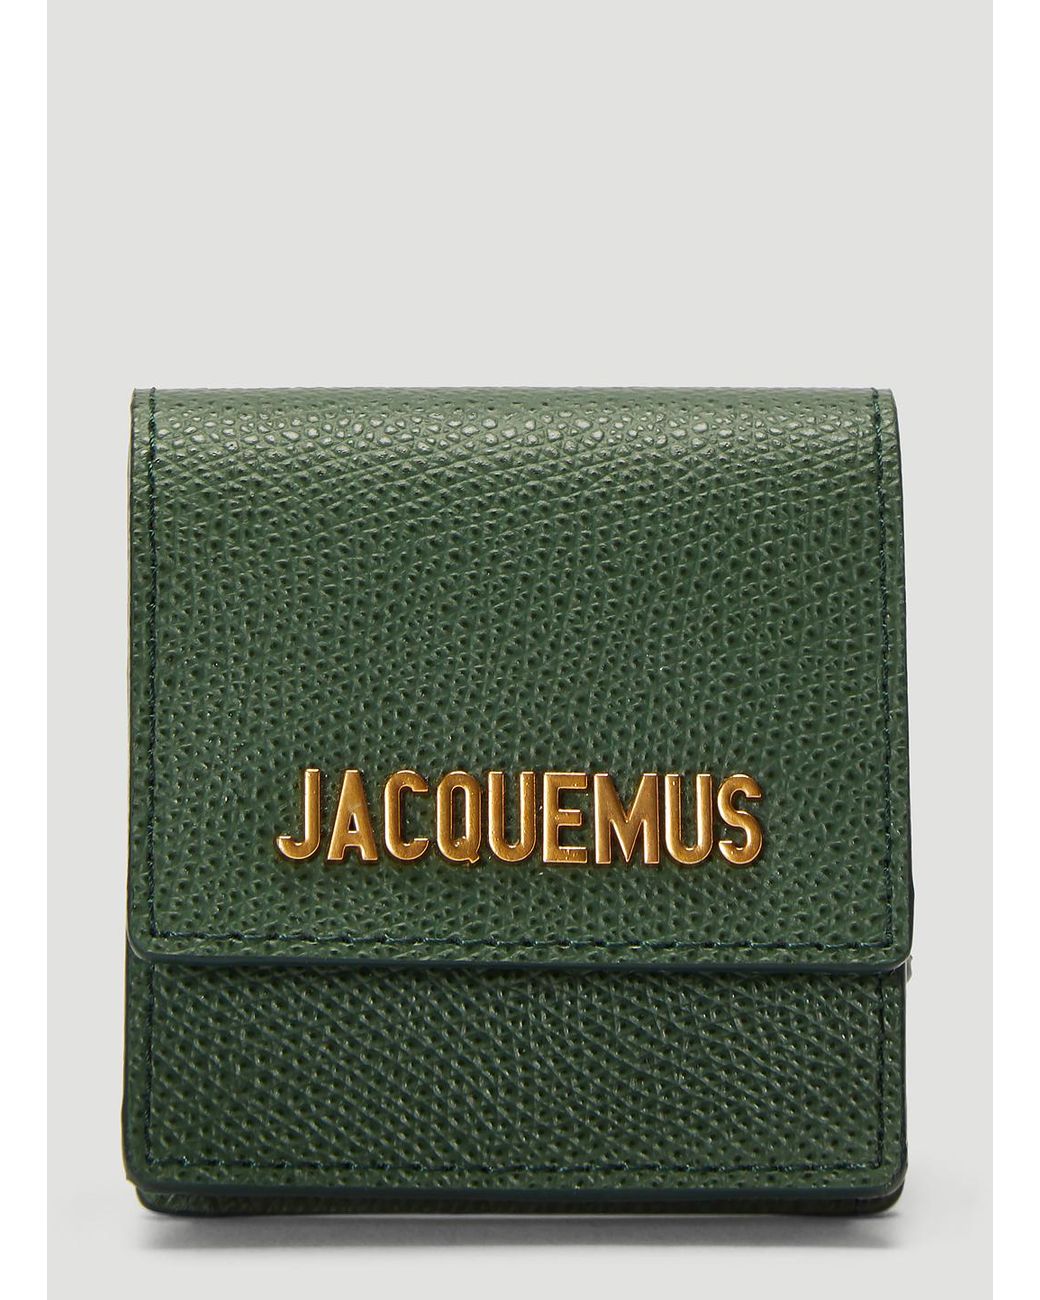 Jacquemus Le Sac Bracelet Grained Leather Bag in Green | Lyst